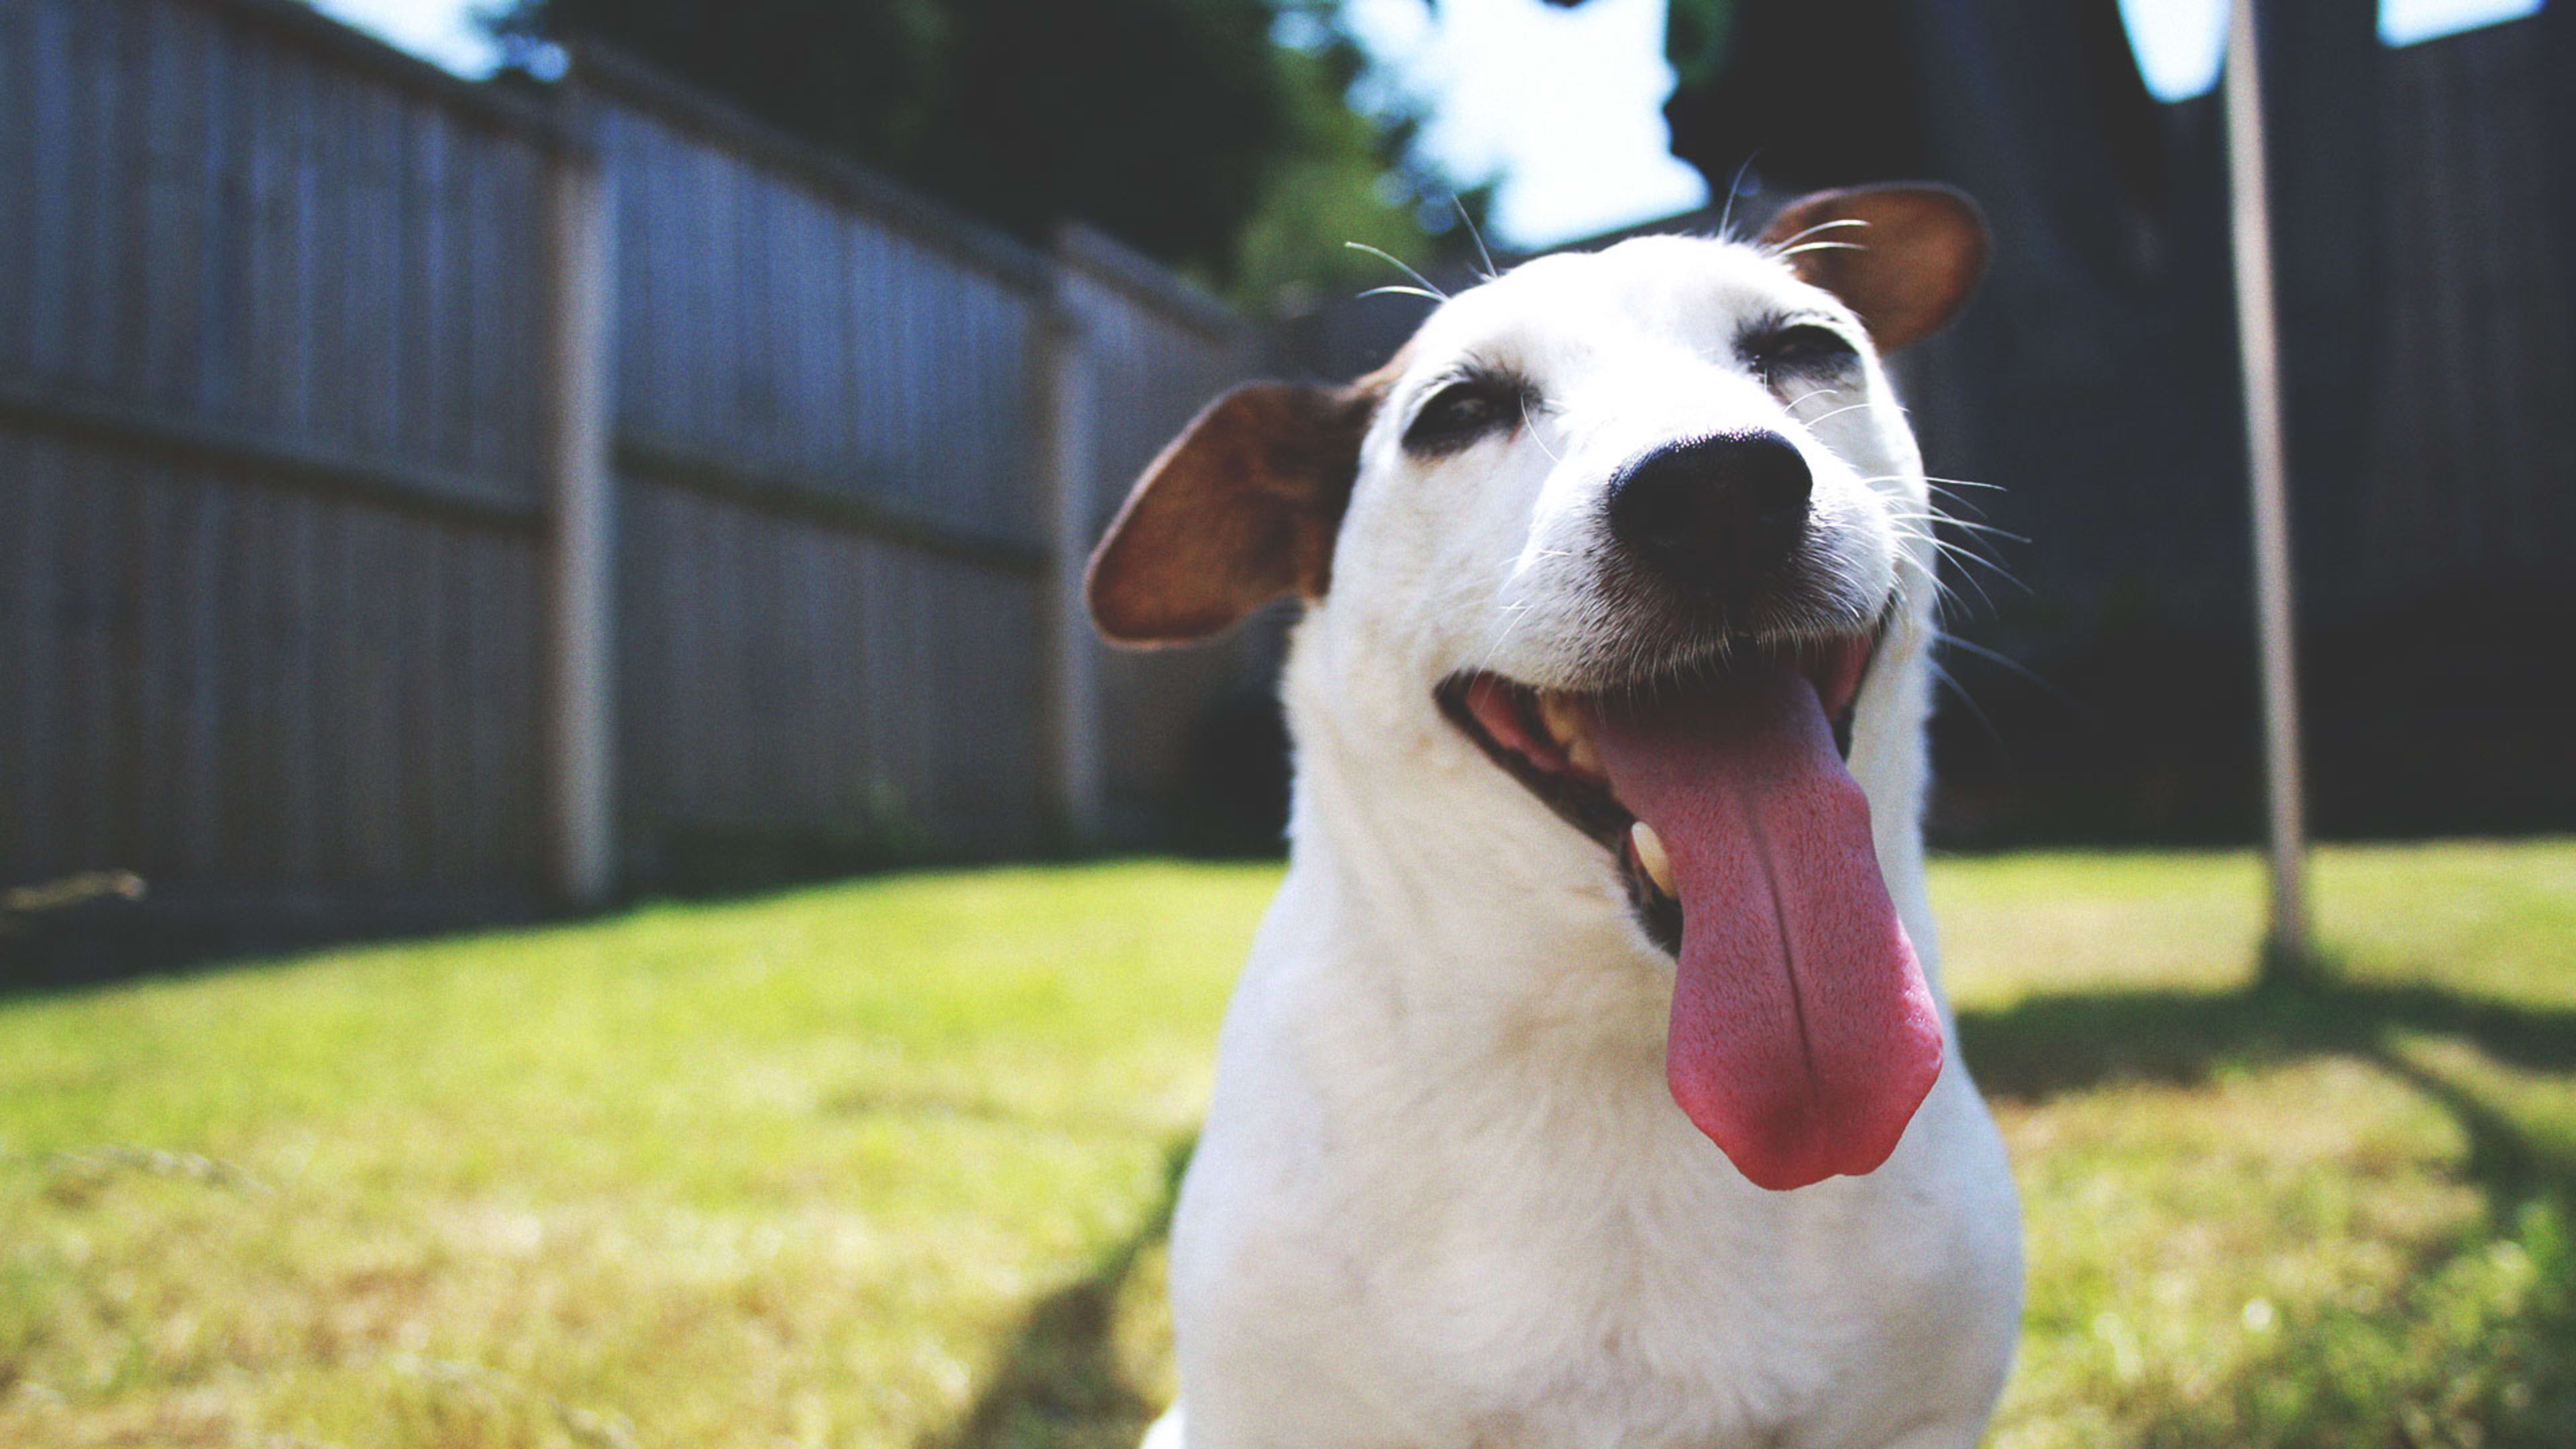 Dog-sitting website DogBuddy fetches $6 million in new funding